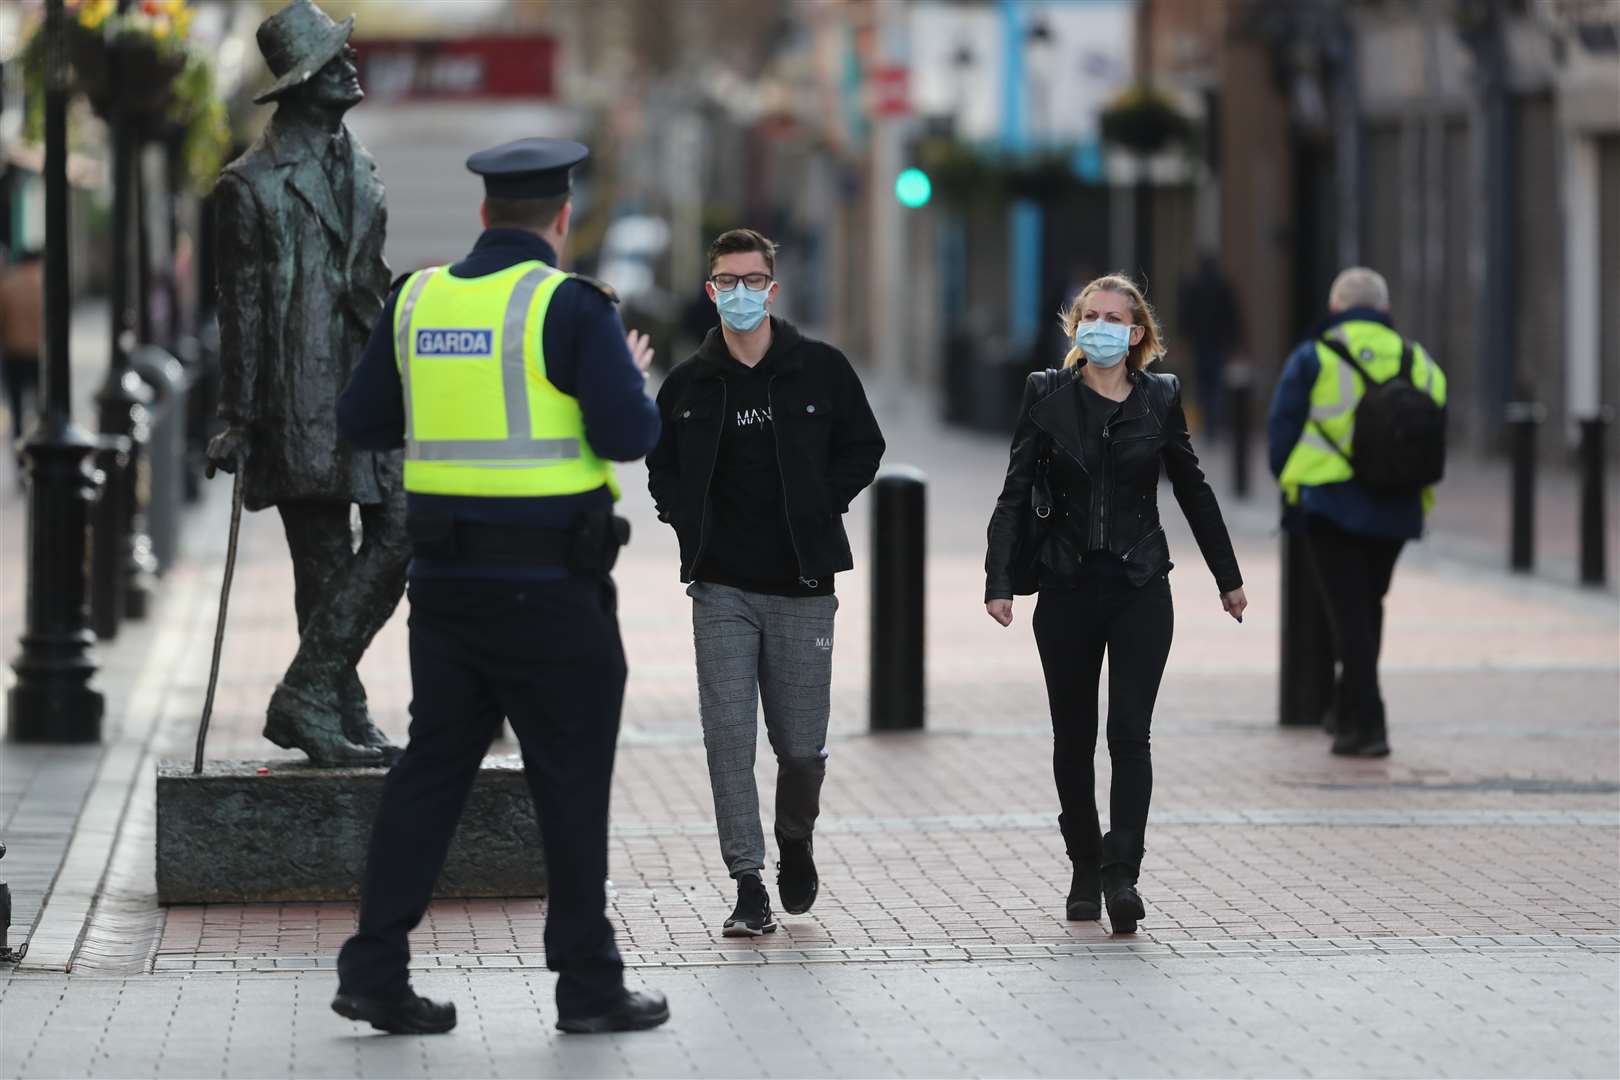 The equipment is intended to protect doctors and nurses (Niall Carson/PA)